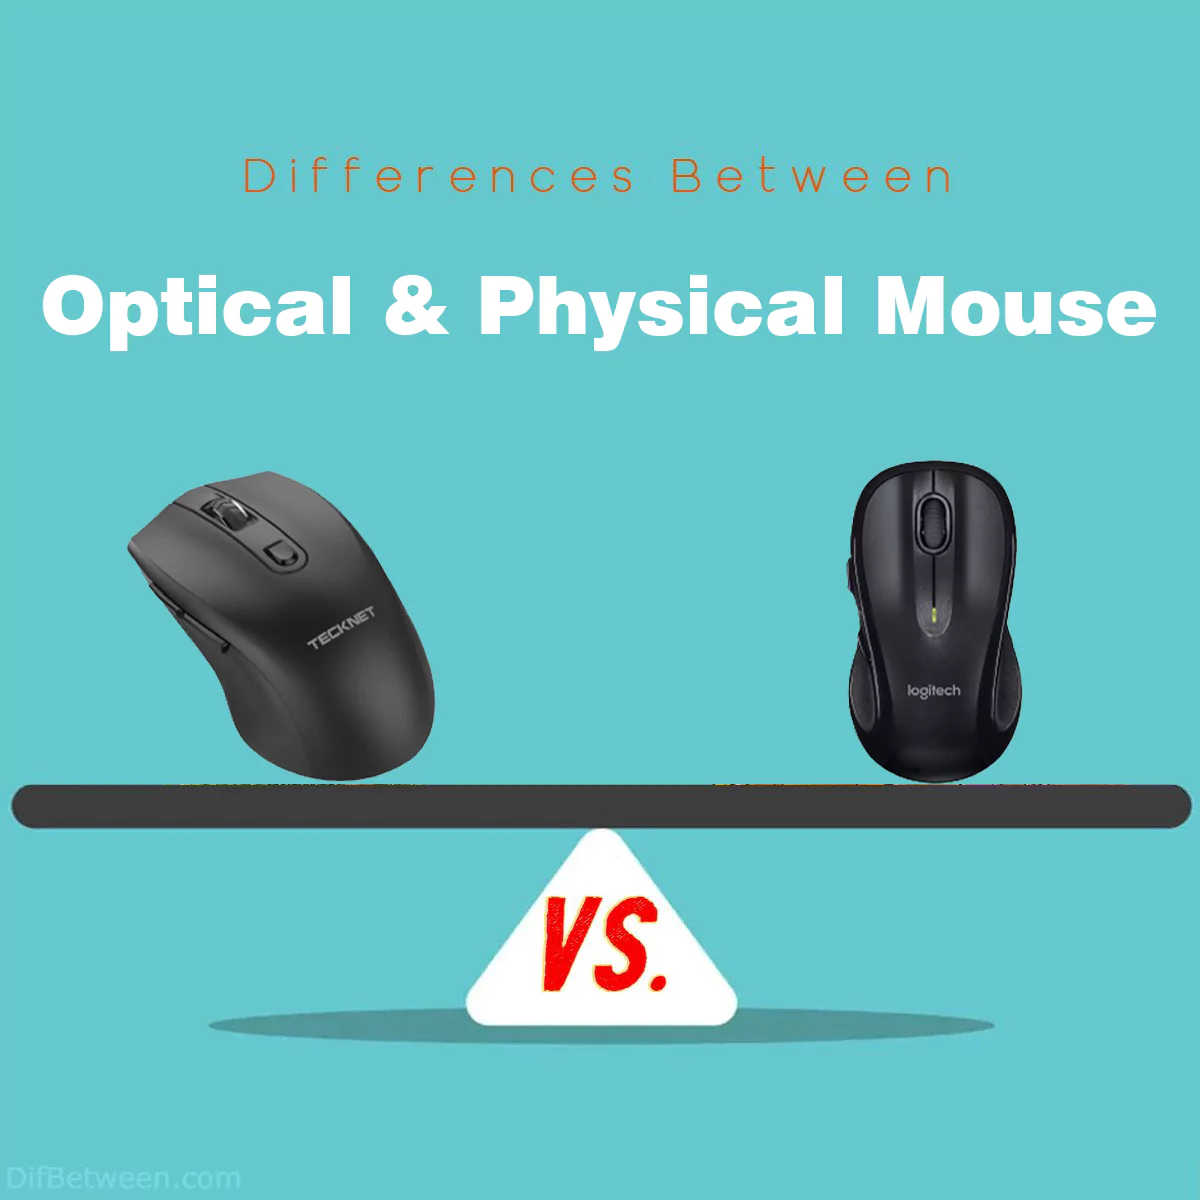 Differences Between Optical and Physical Mouse